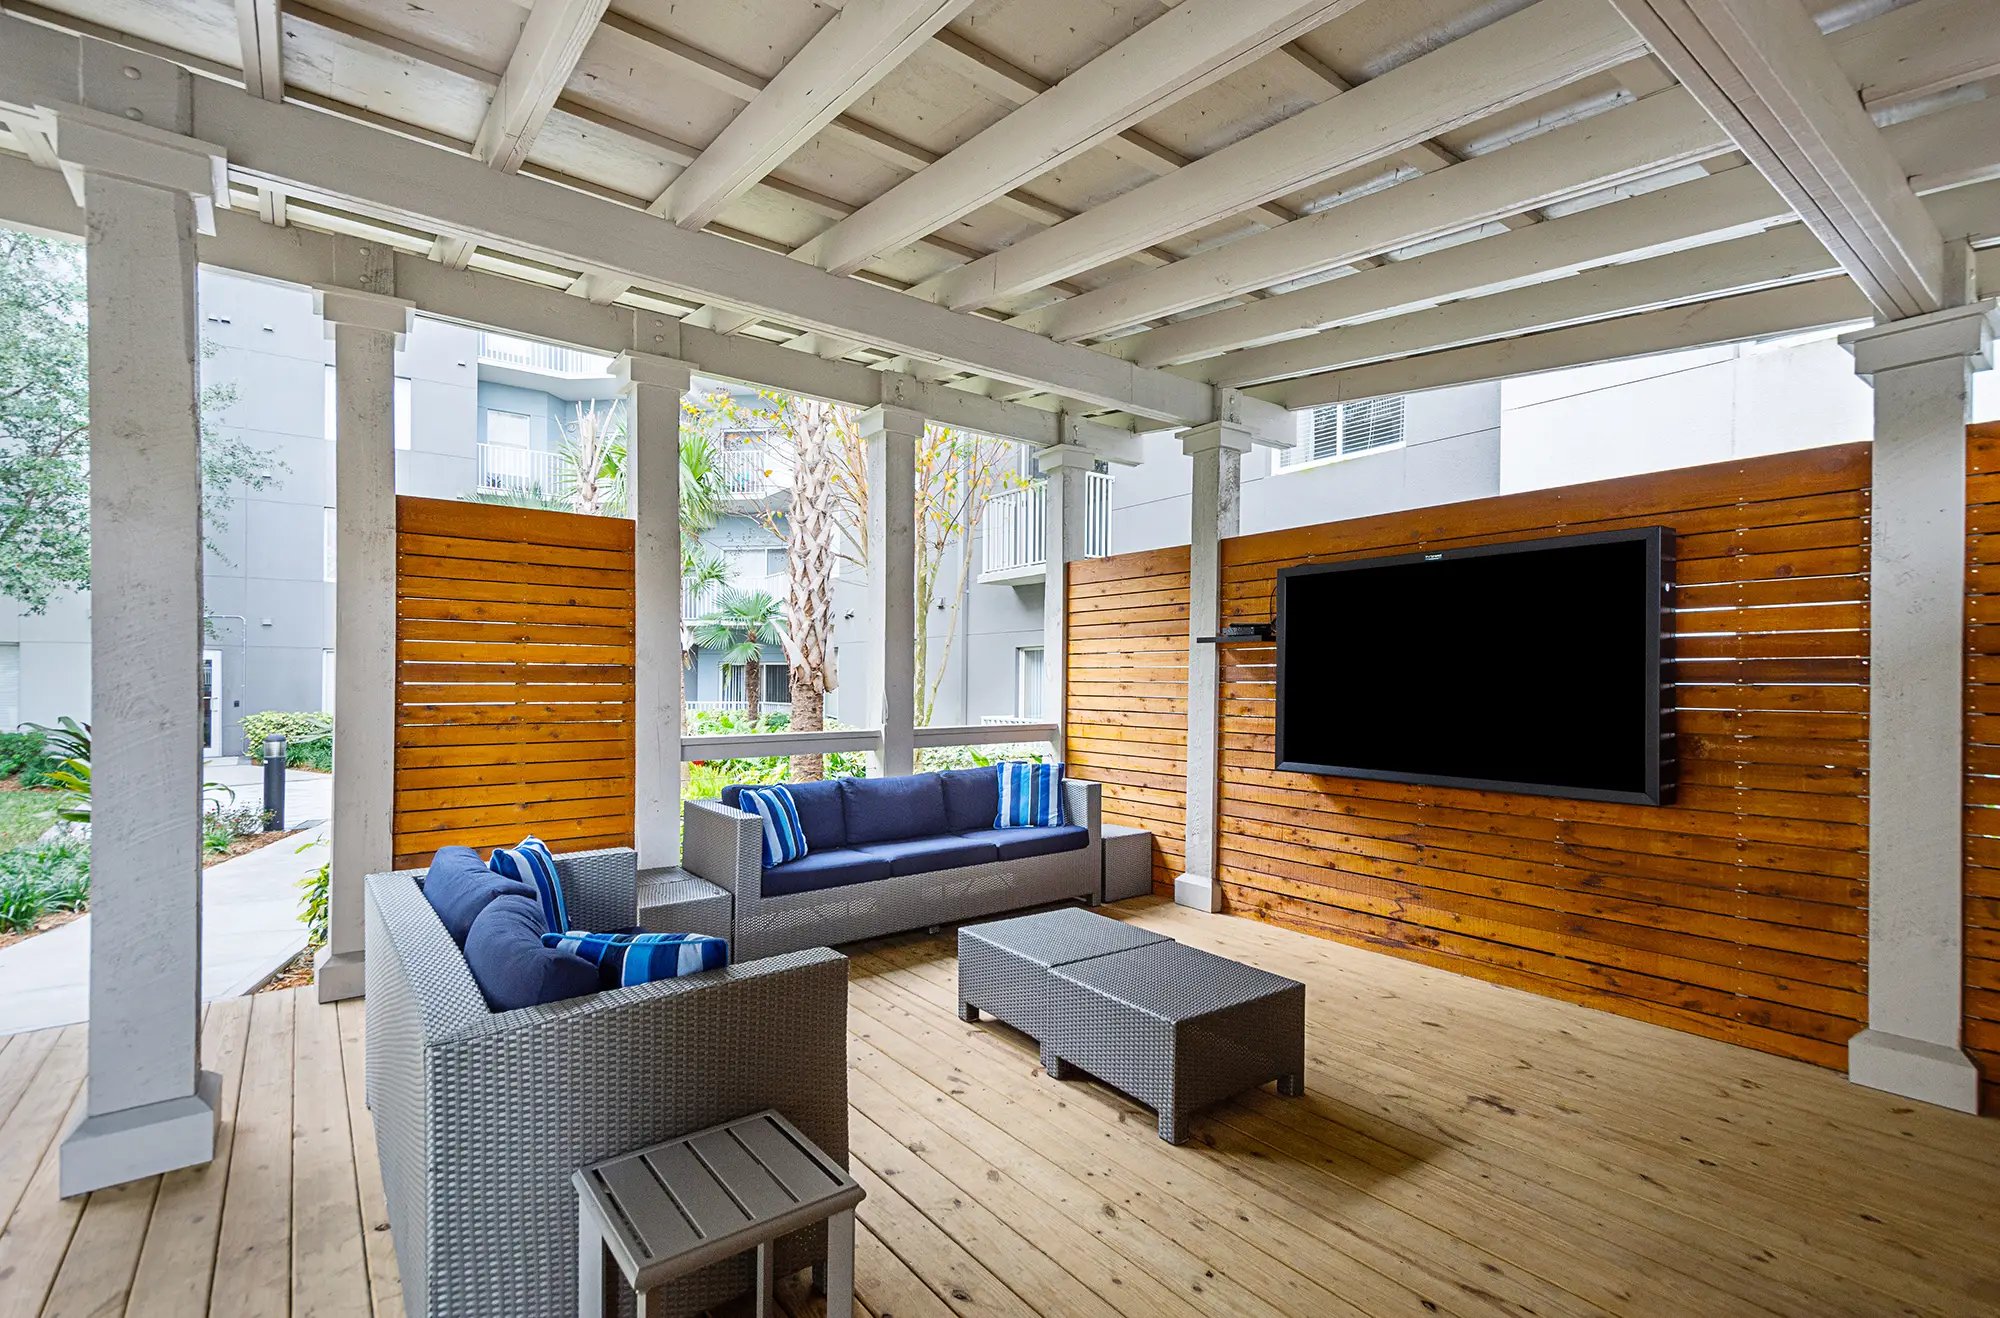 Outdoor covered seating area with couches and tv mounted on the wall